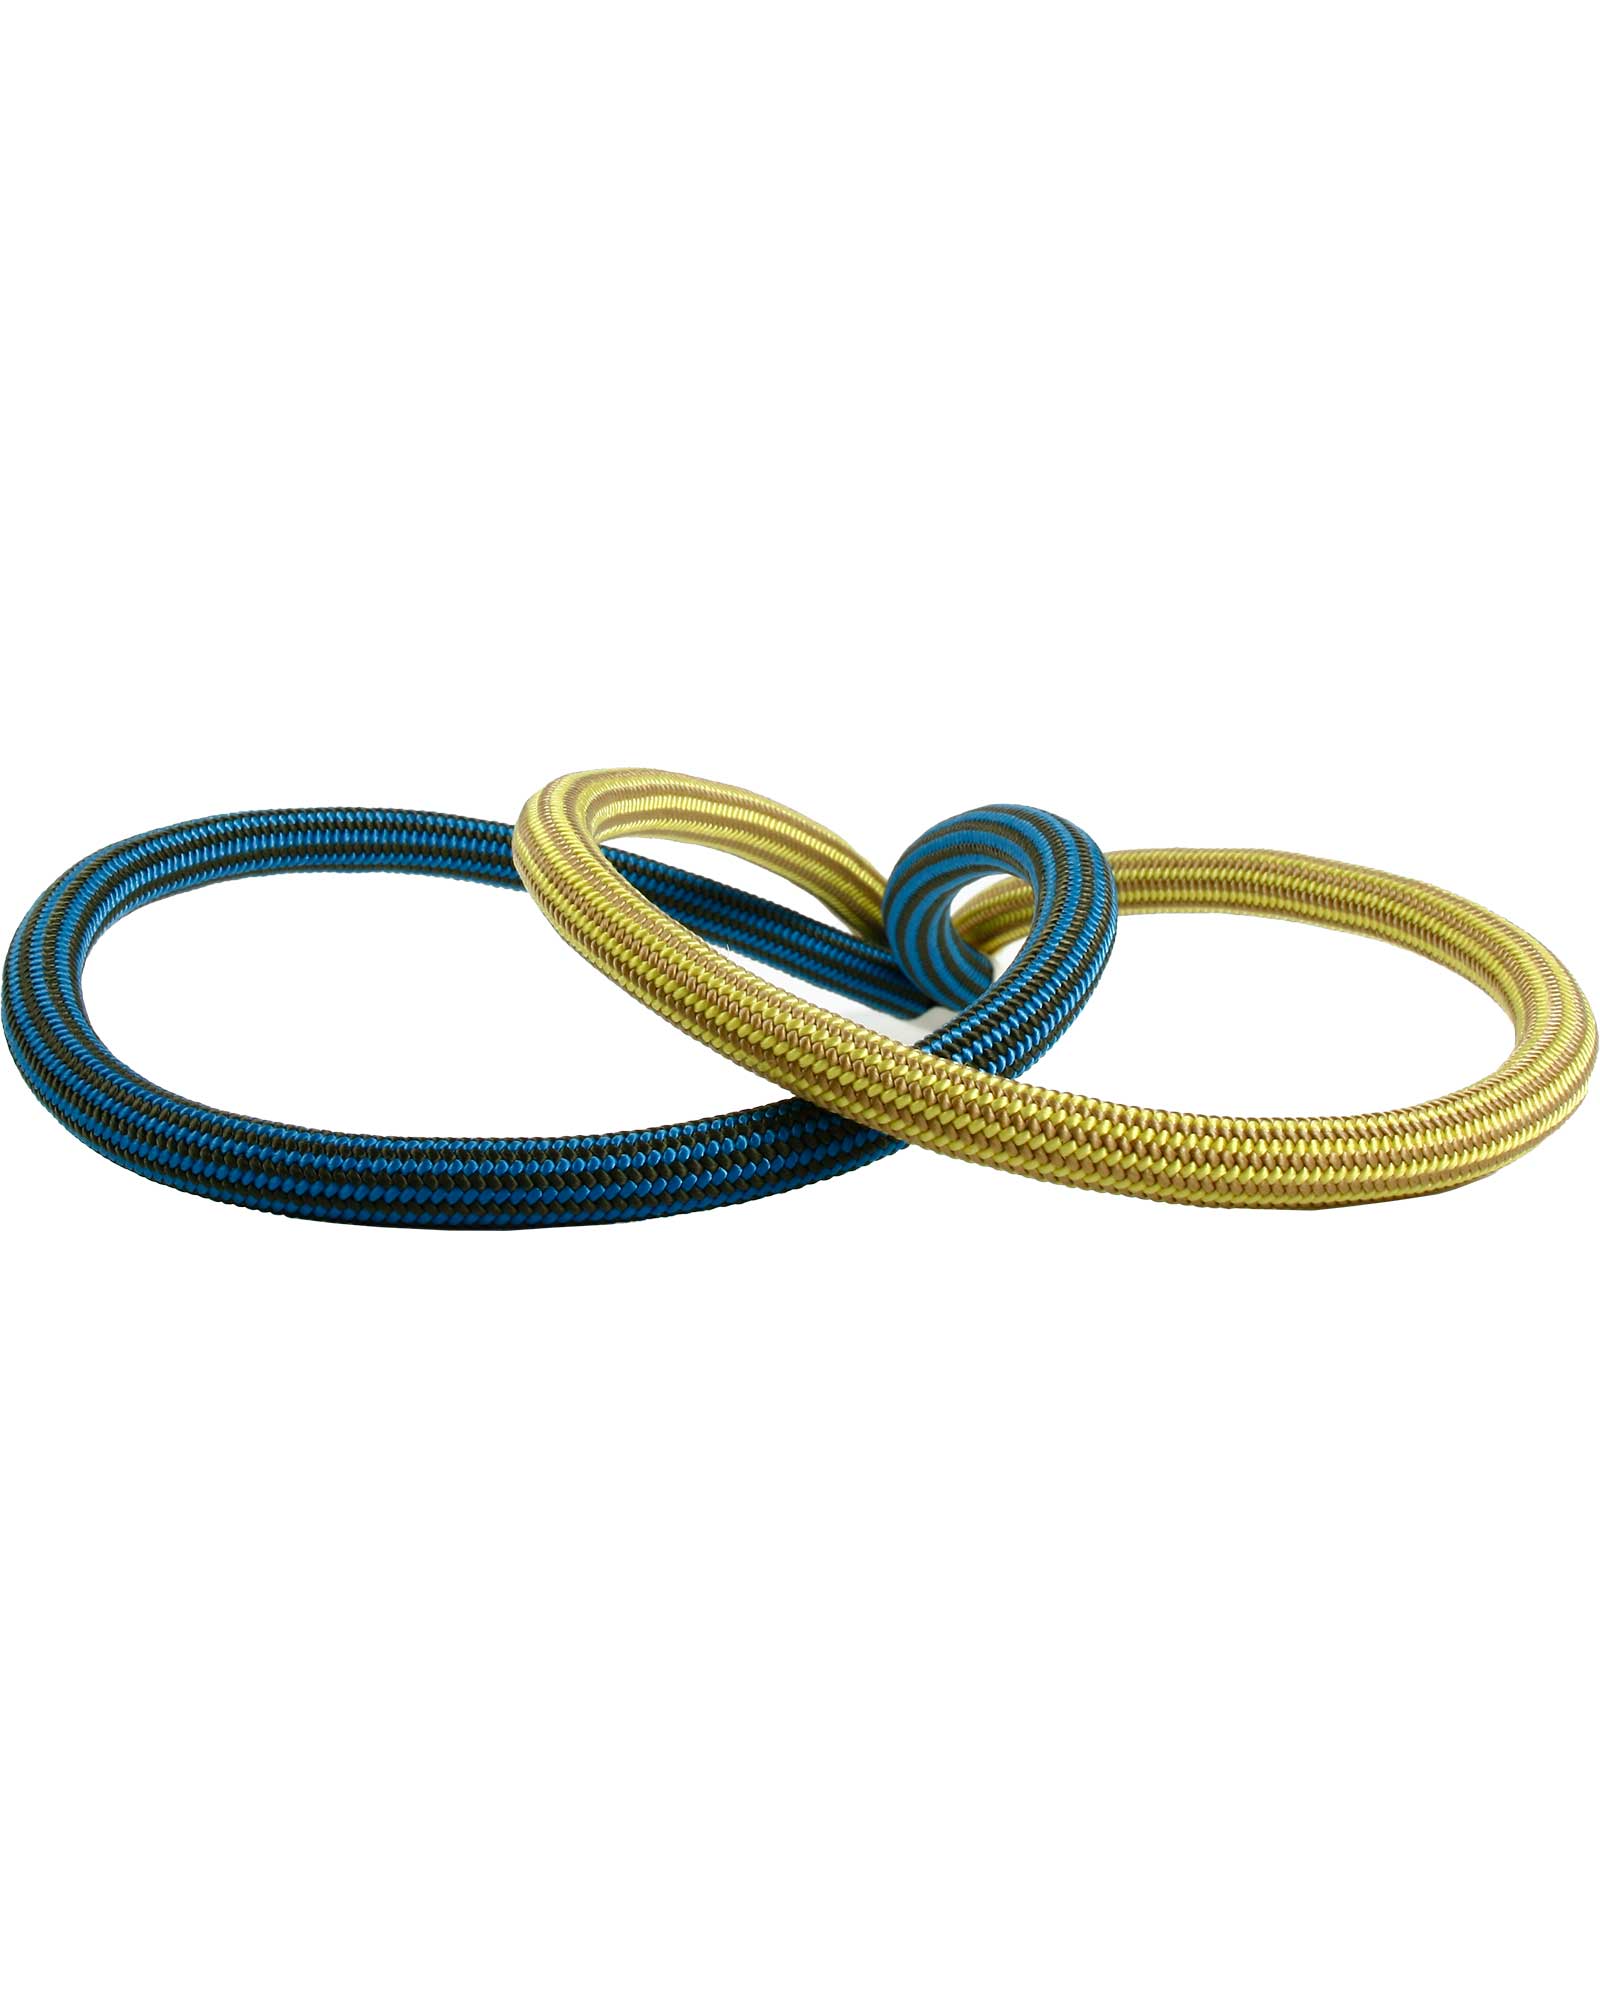 Edelweiss Lithium 8.5mm X 60m Rope